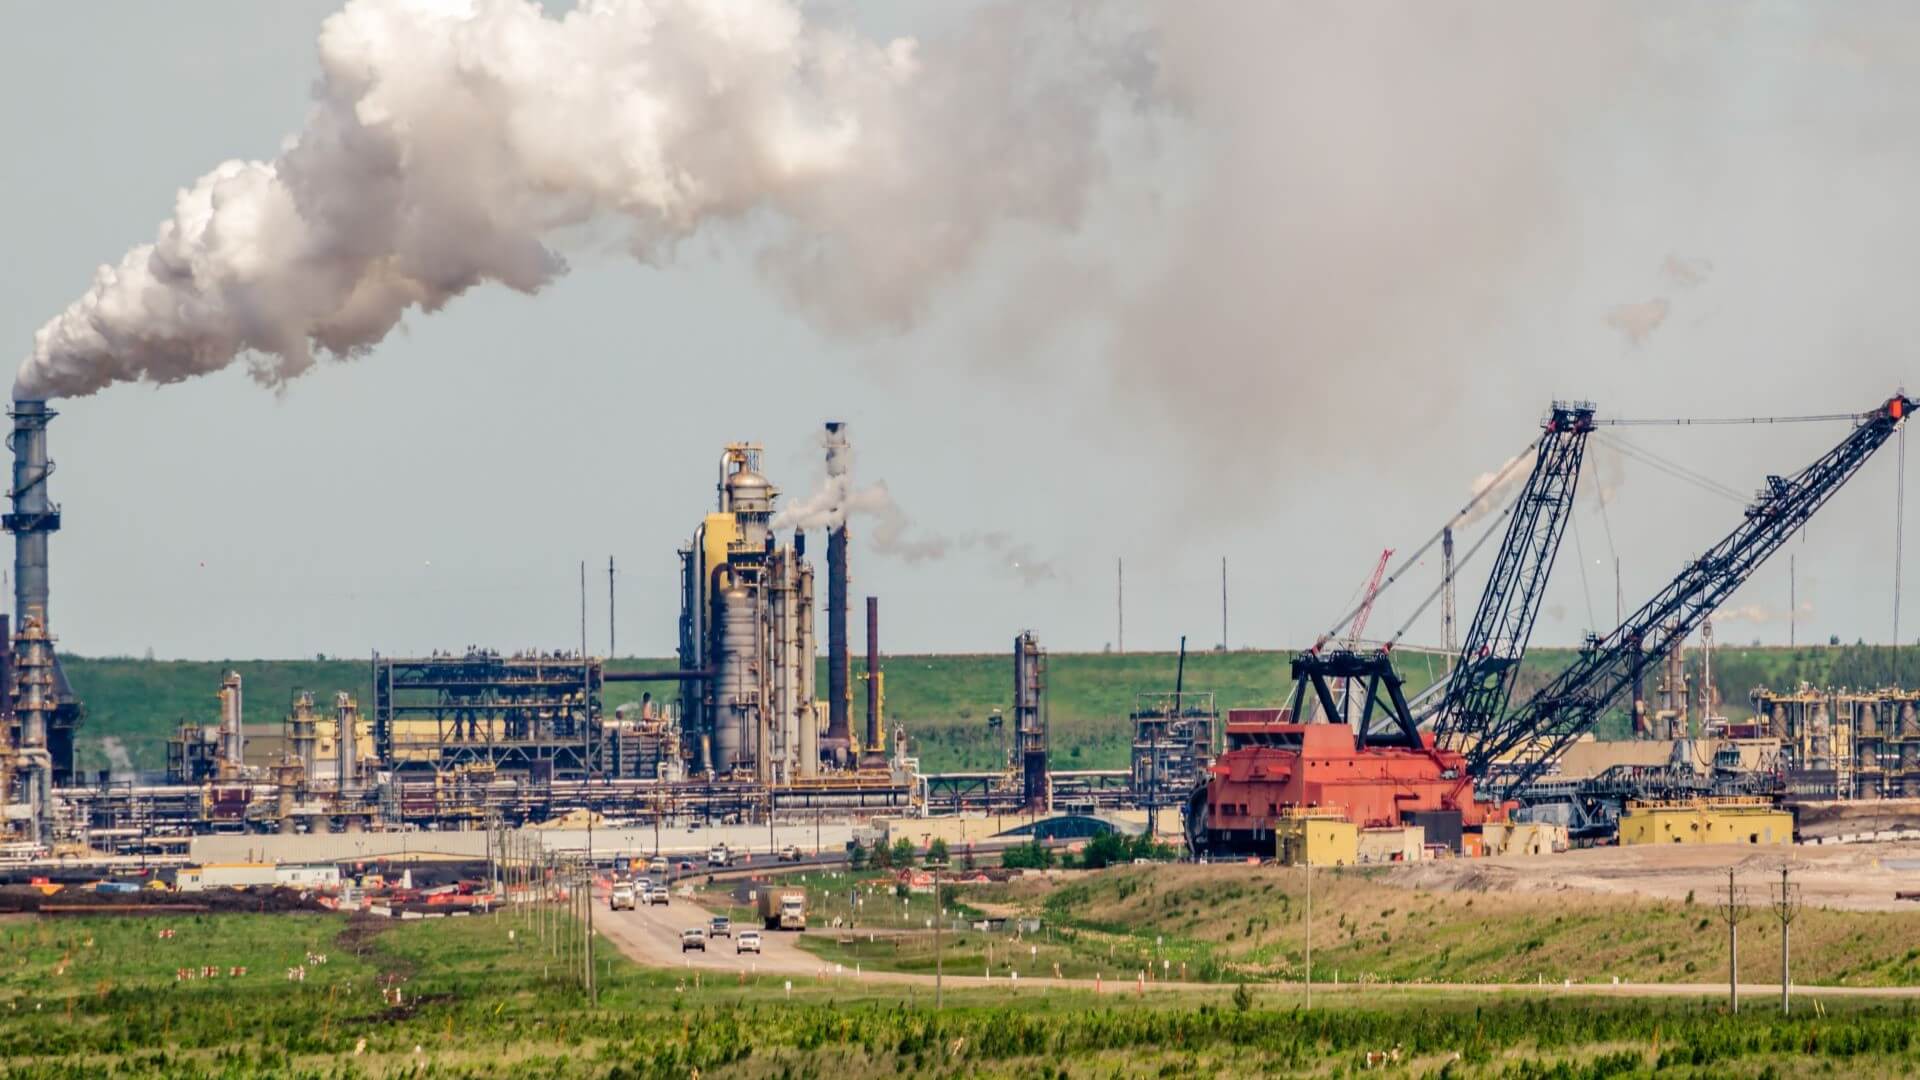 Distant view of crane and machinery working in industrial oil sands, with smoking chimney stacks to left